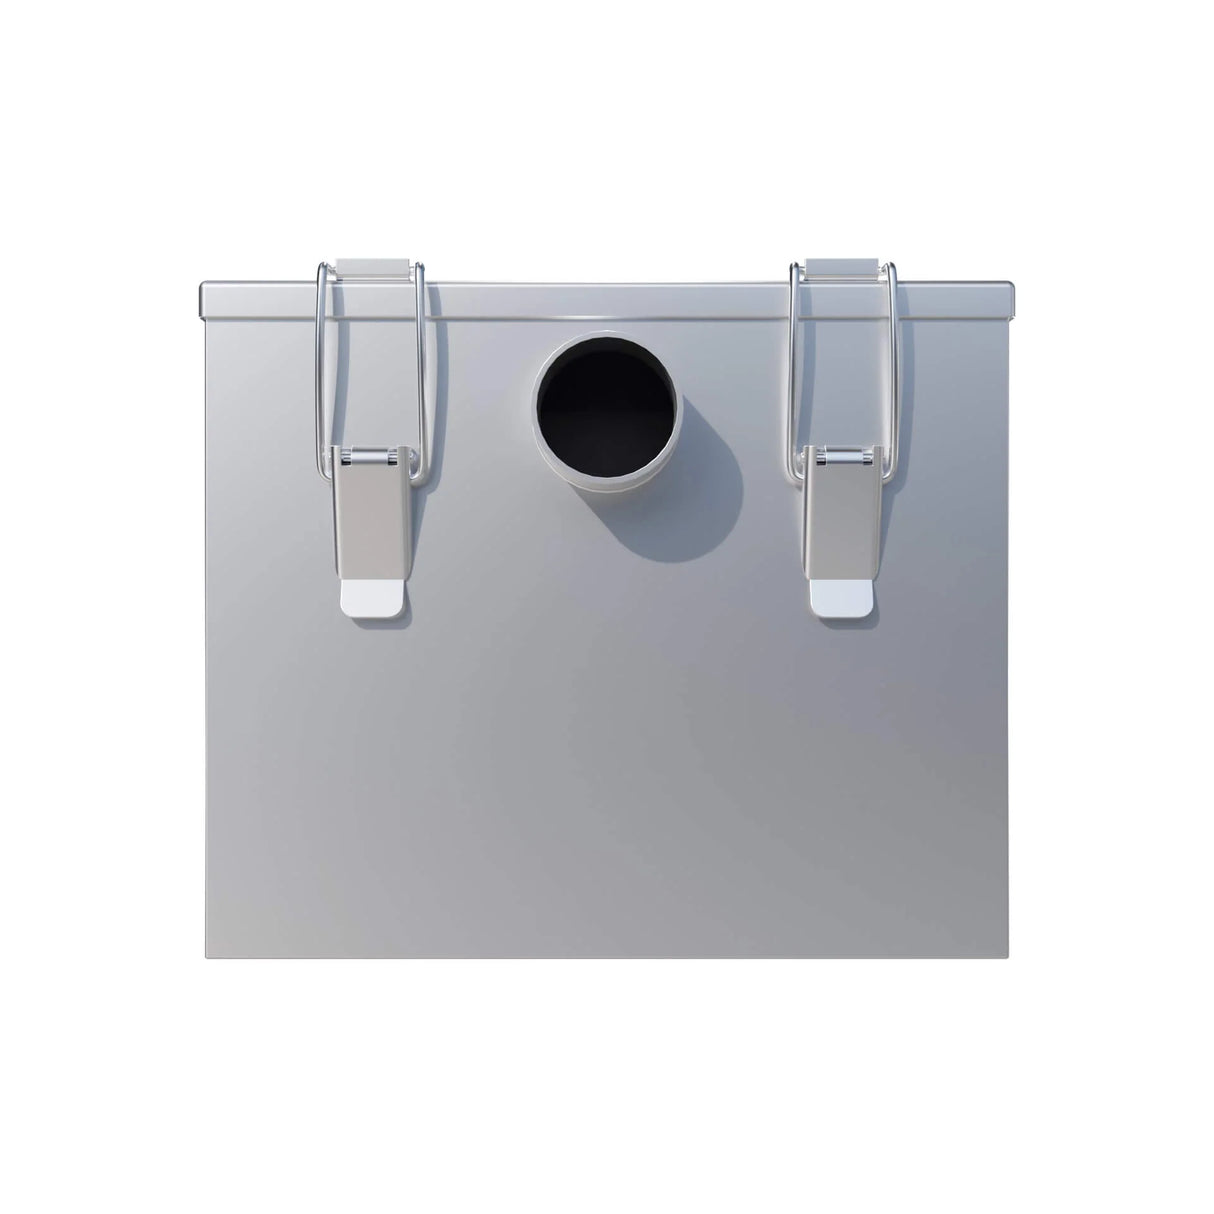 Davlex Stainless Steel Grease Trap 16 Litre Capacity